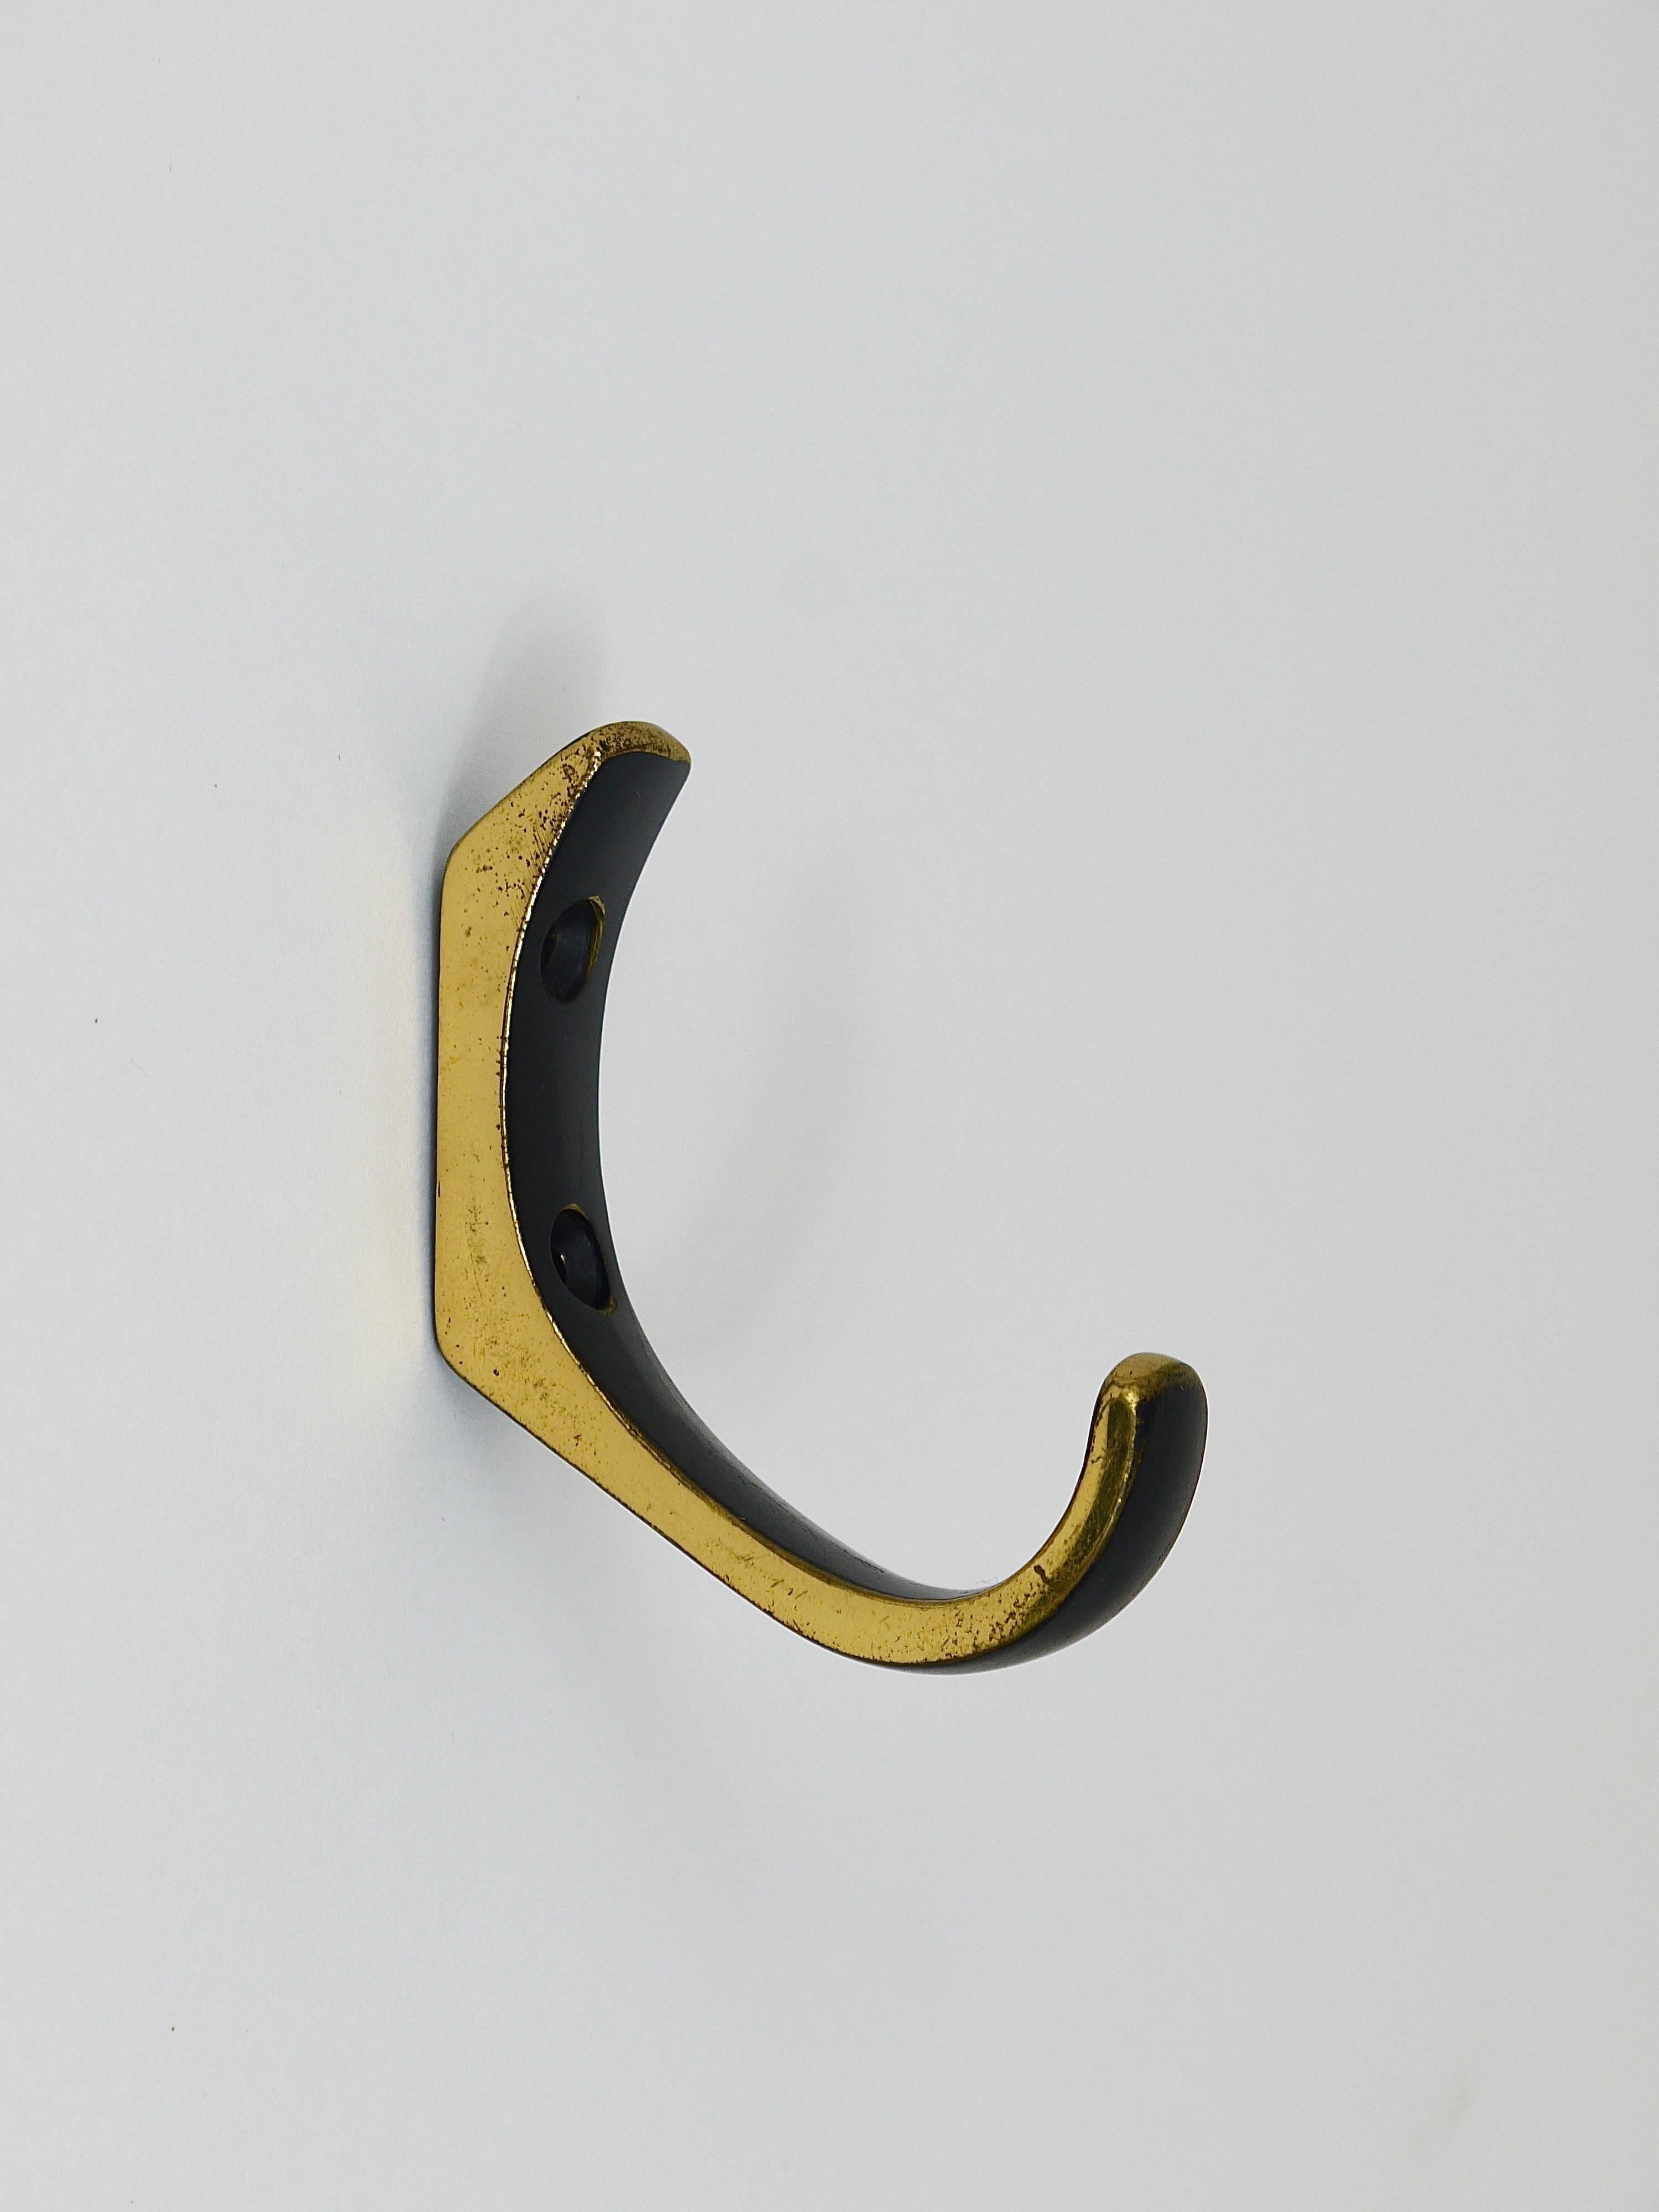 A set of up three large and two smaller modernist wall hooks, made of black-finished brass, executed in the 1950s by Hertha Baller, Austria. In very good condition, with marginal patina on the brass.

 